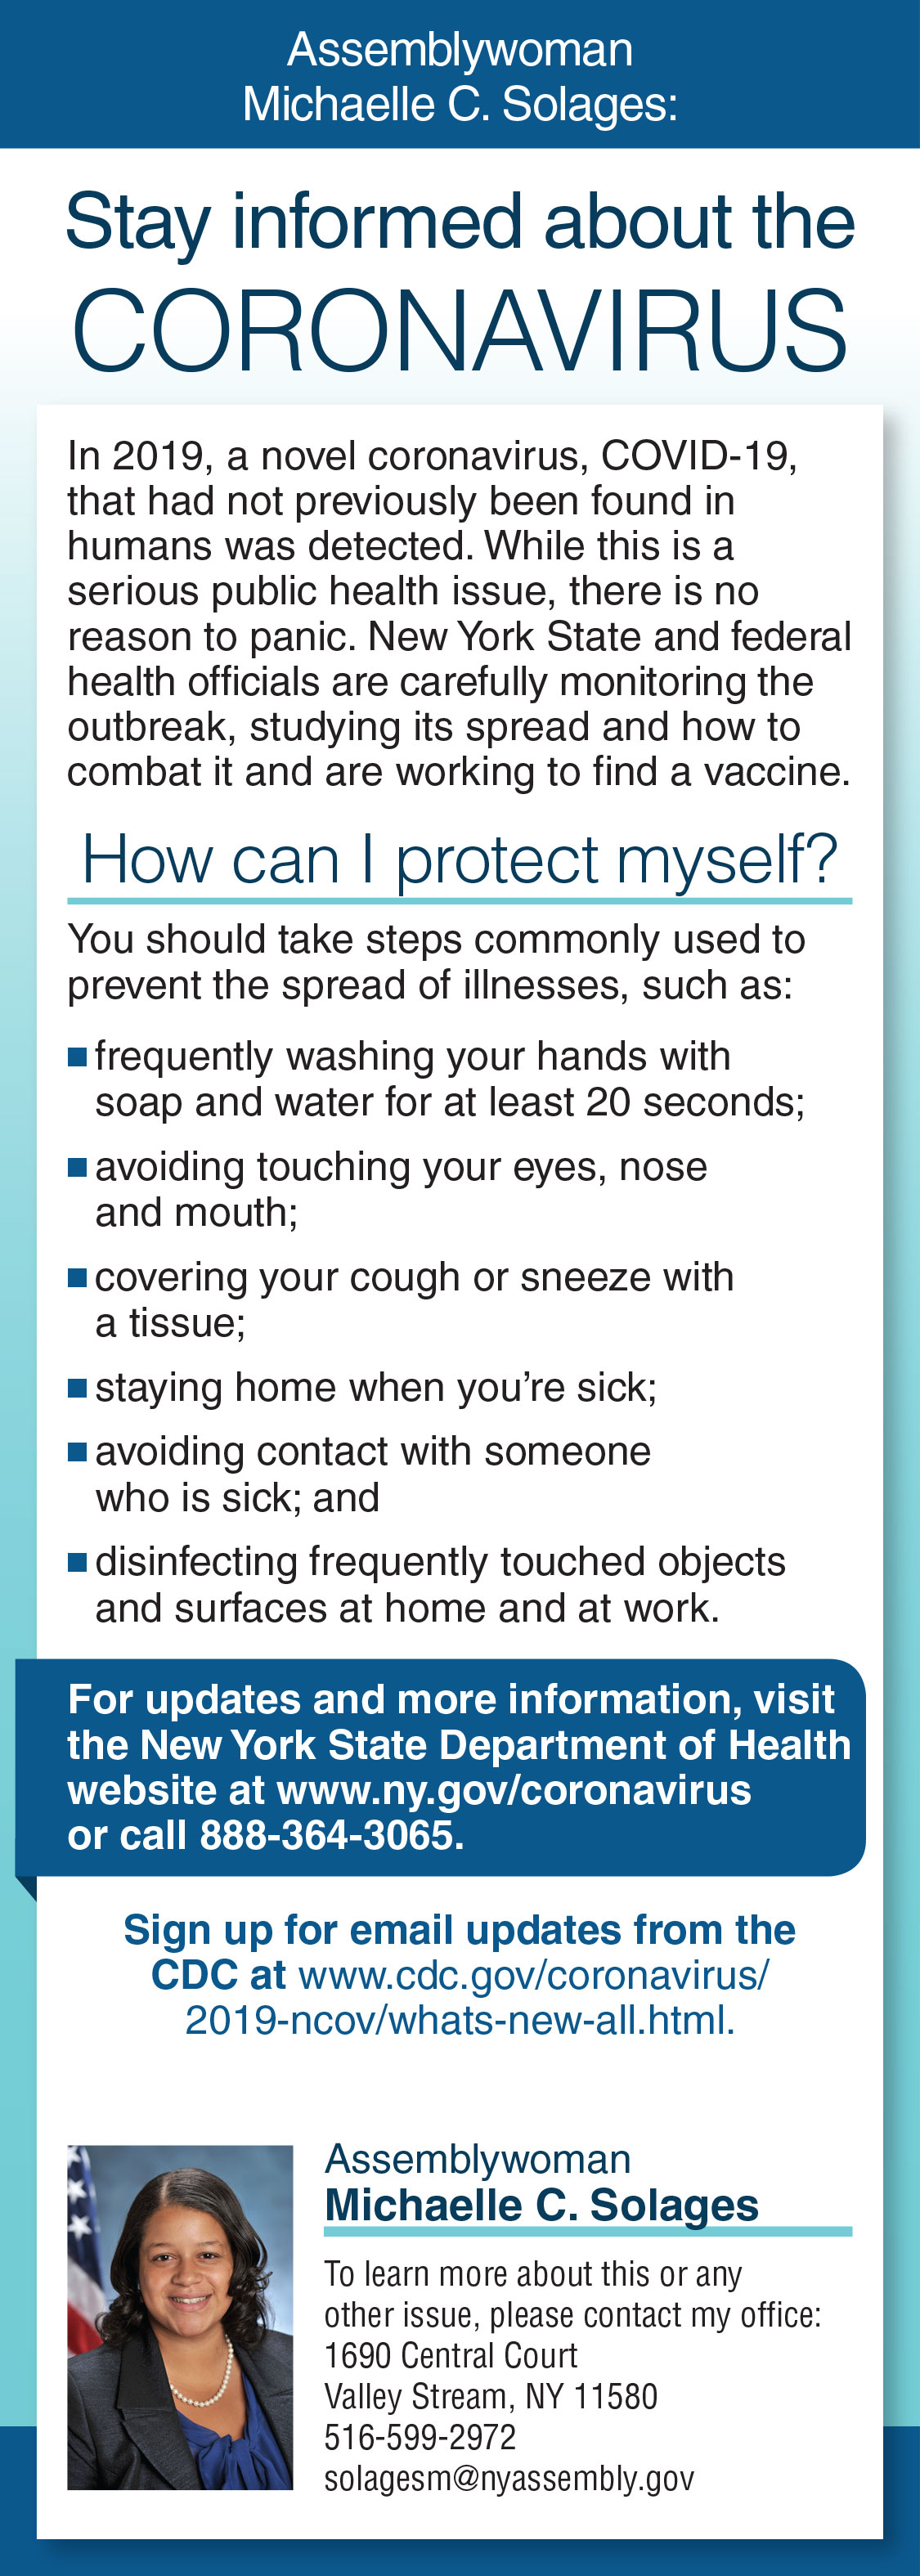 Stay informed about the Coronavirus